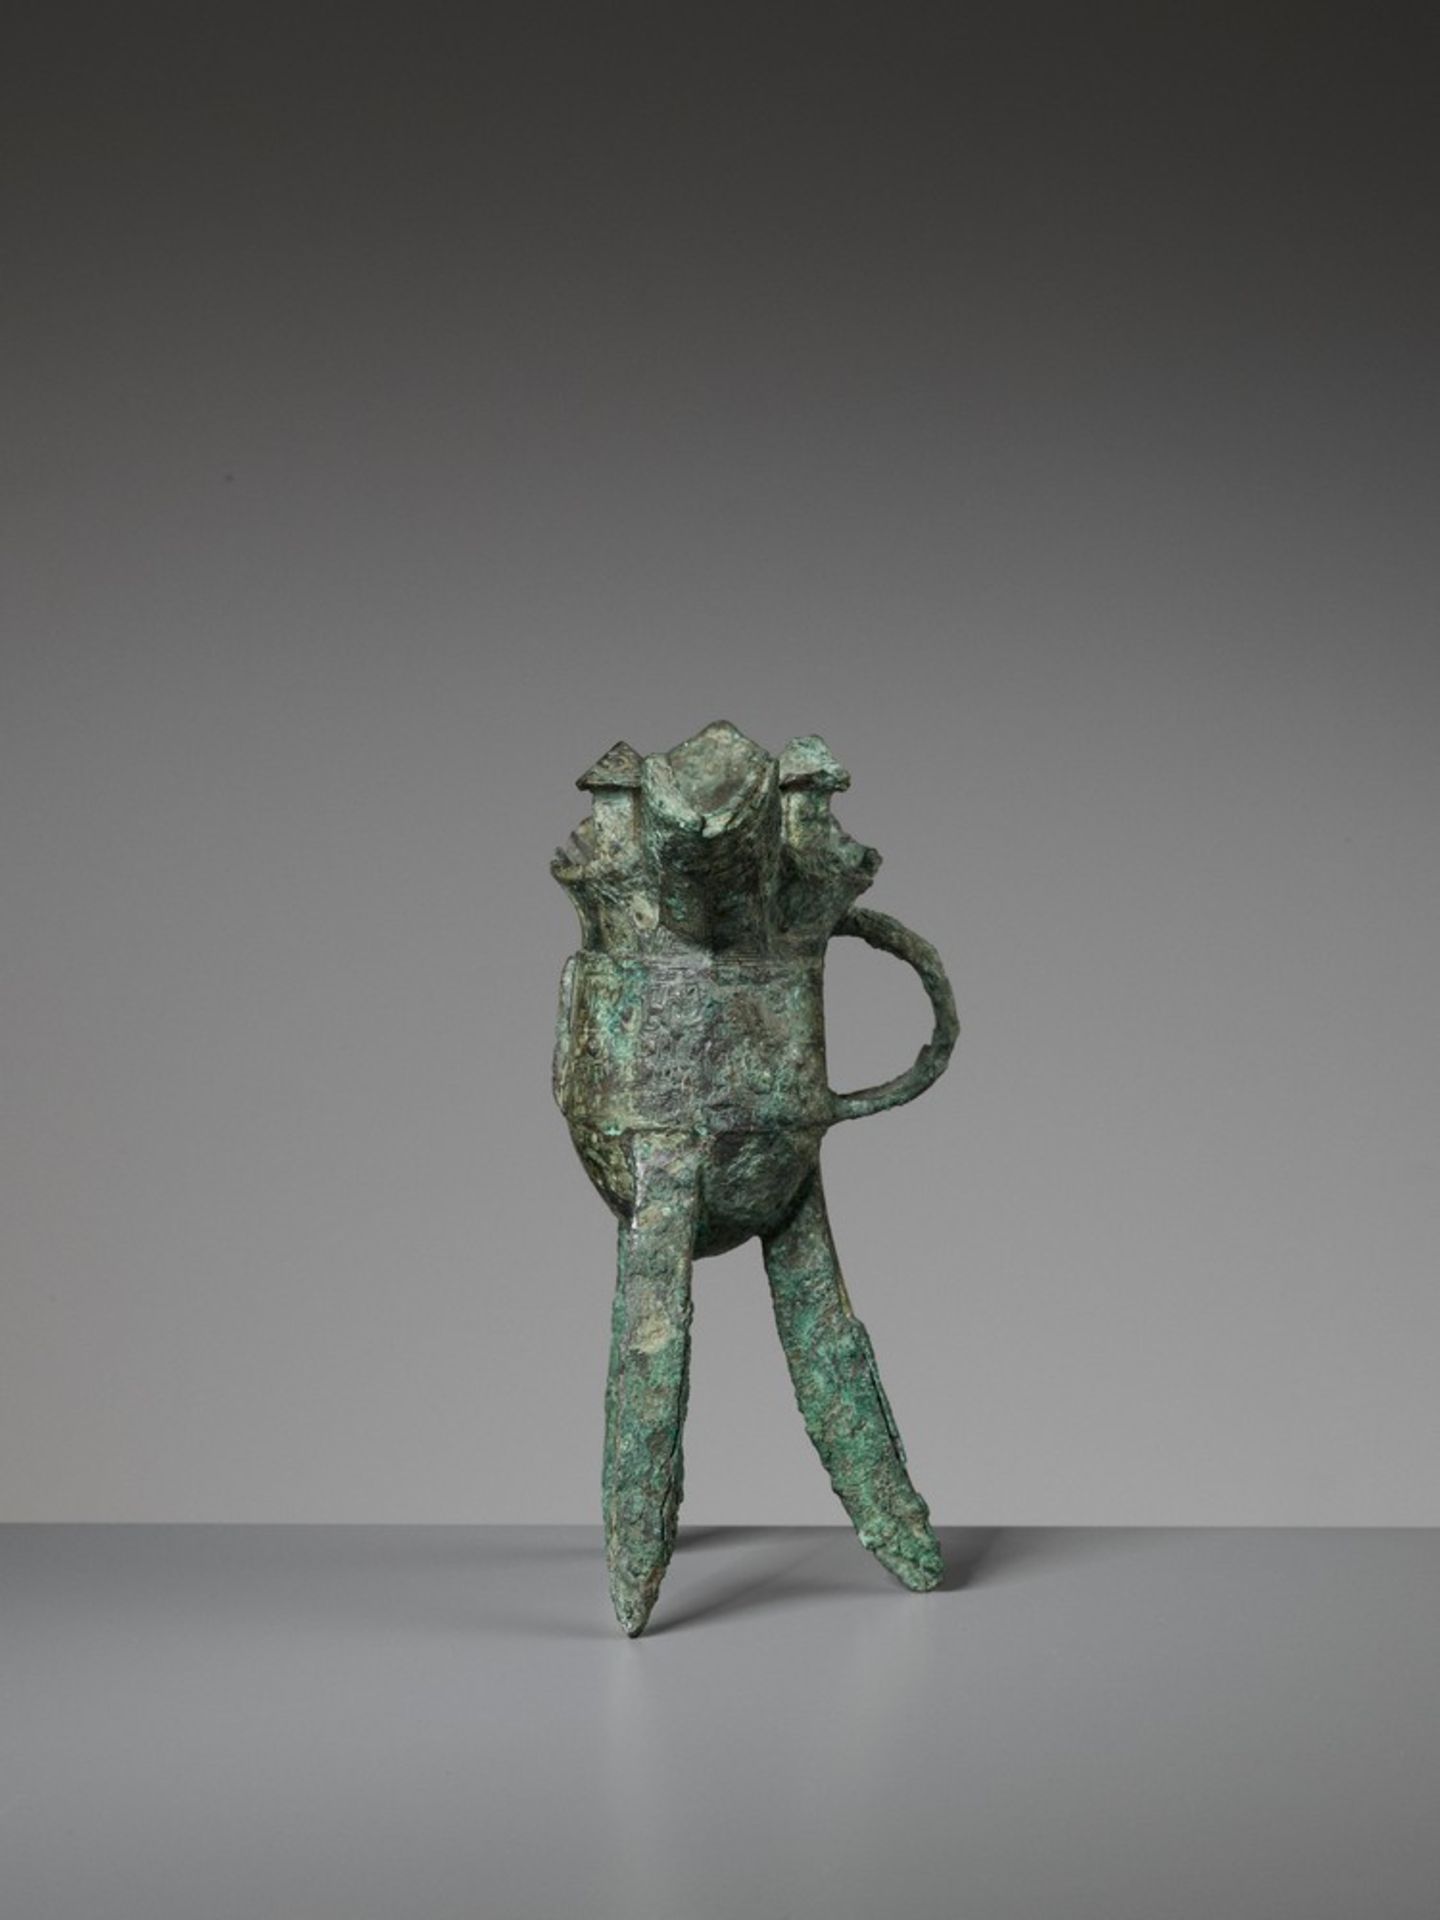 AN ARCHAIC BRONZE RITUAL WINE VESSEL, JUE, SHANG DYNASTY - Image 14 of 15